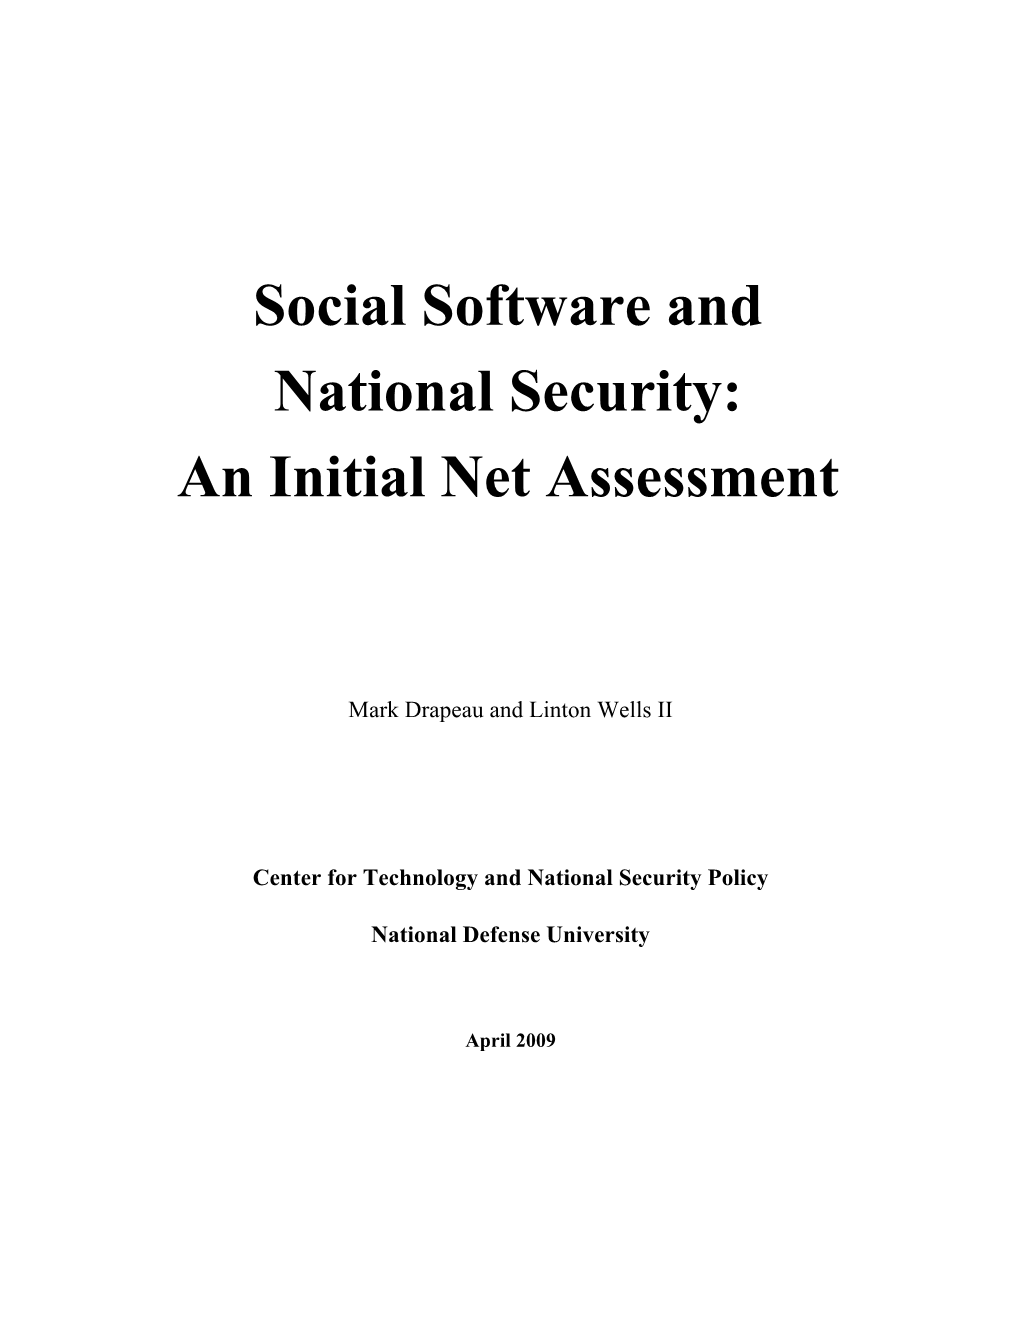 Social Software in National Security